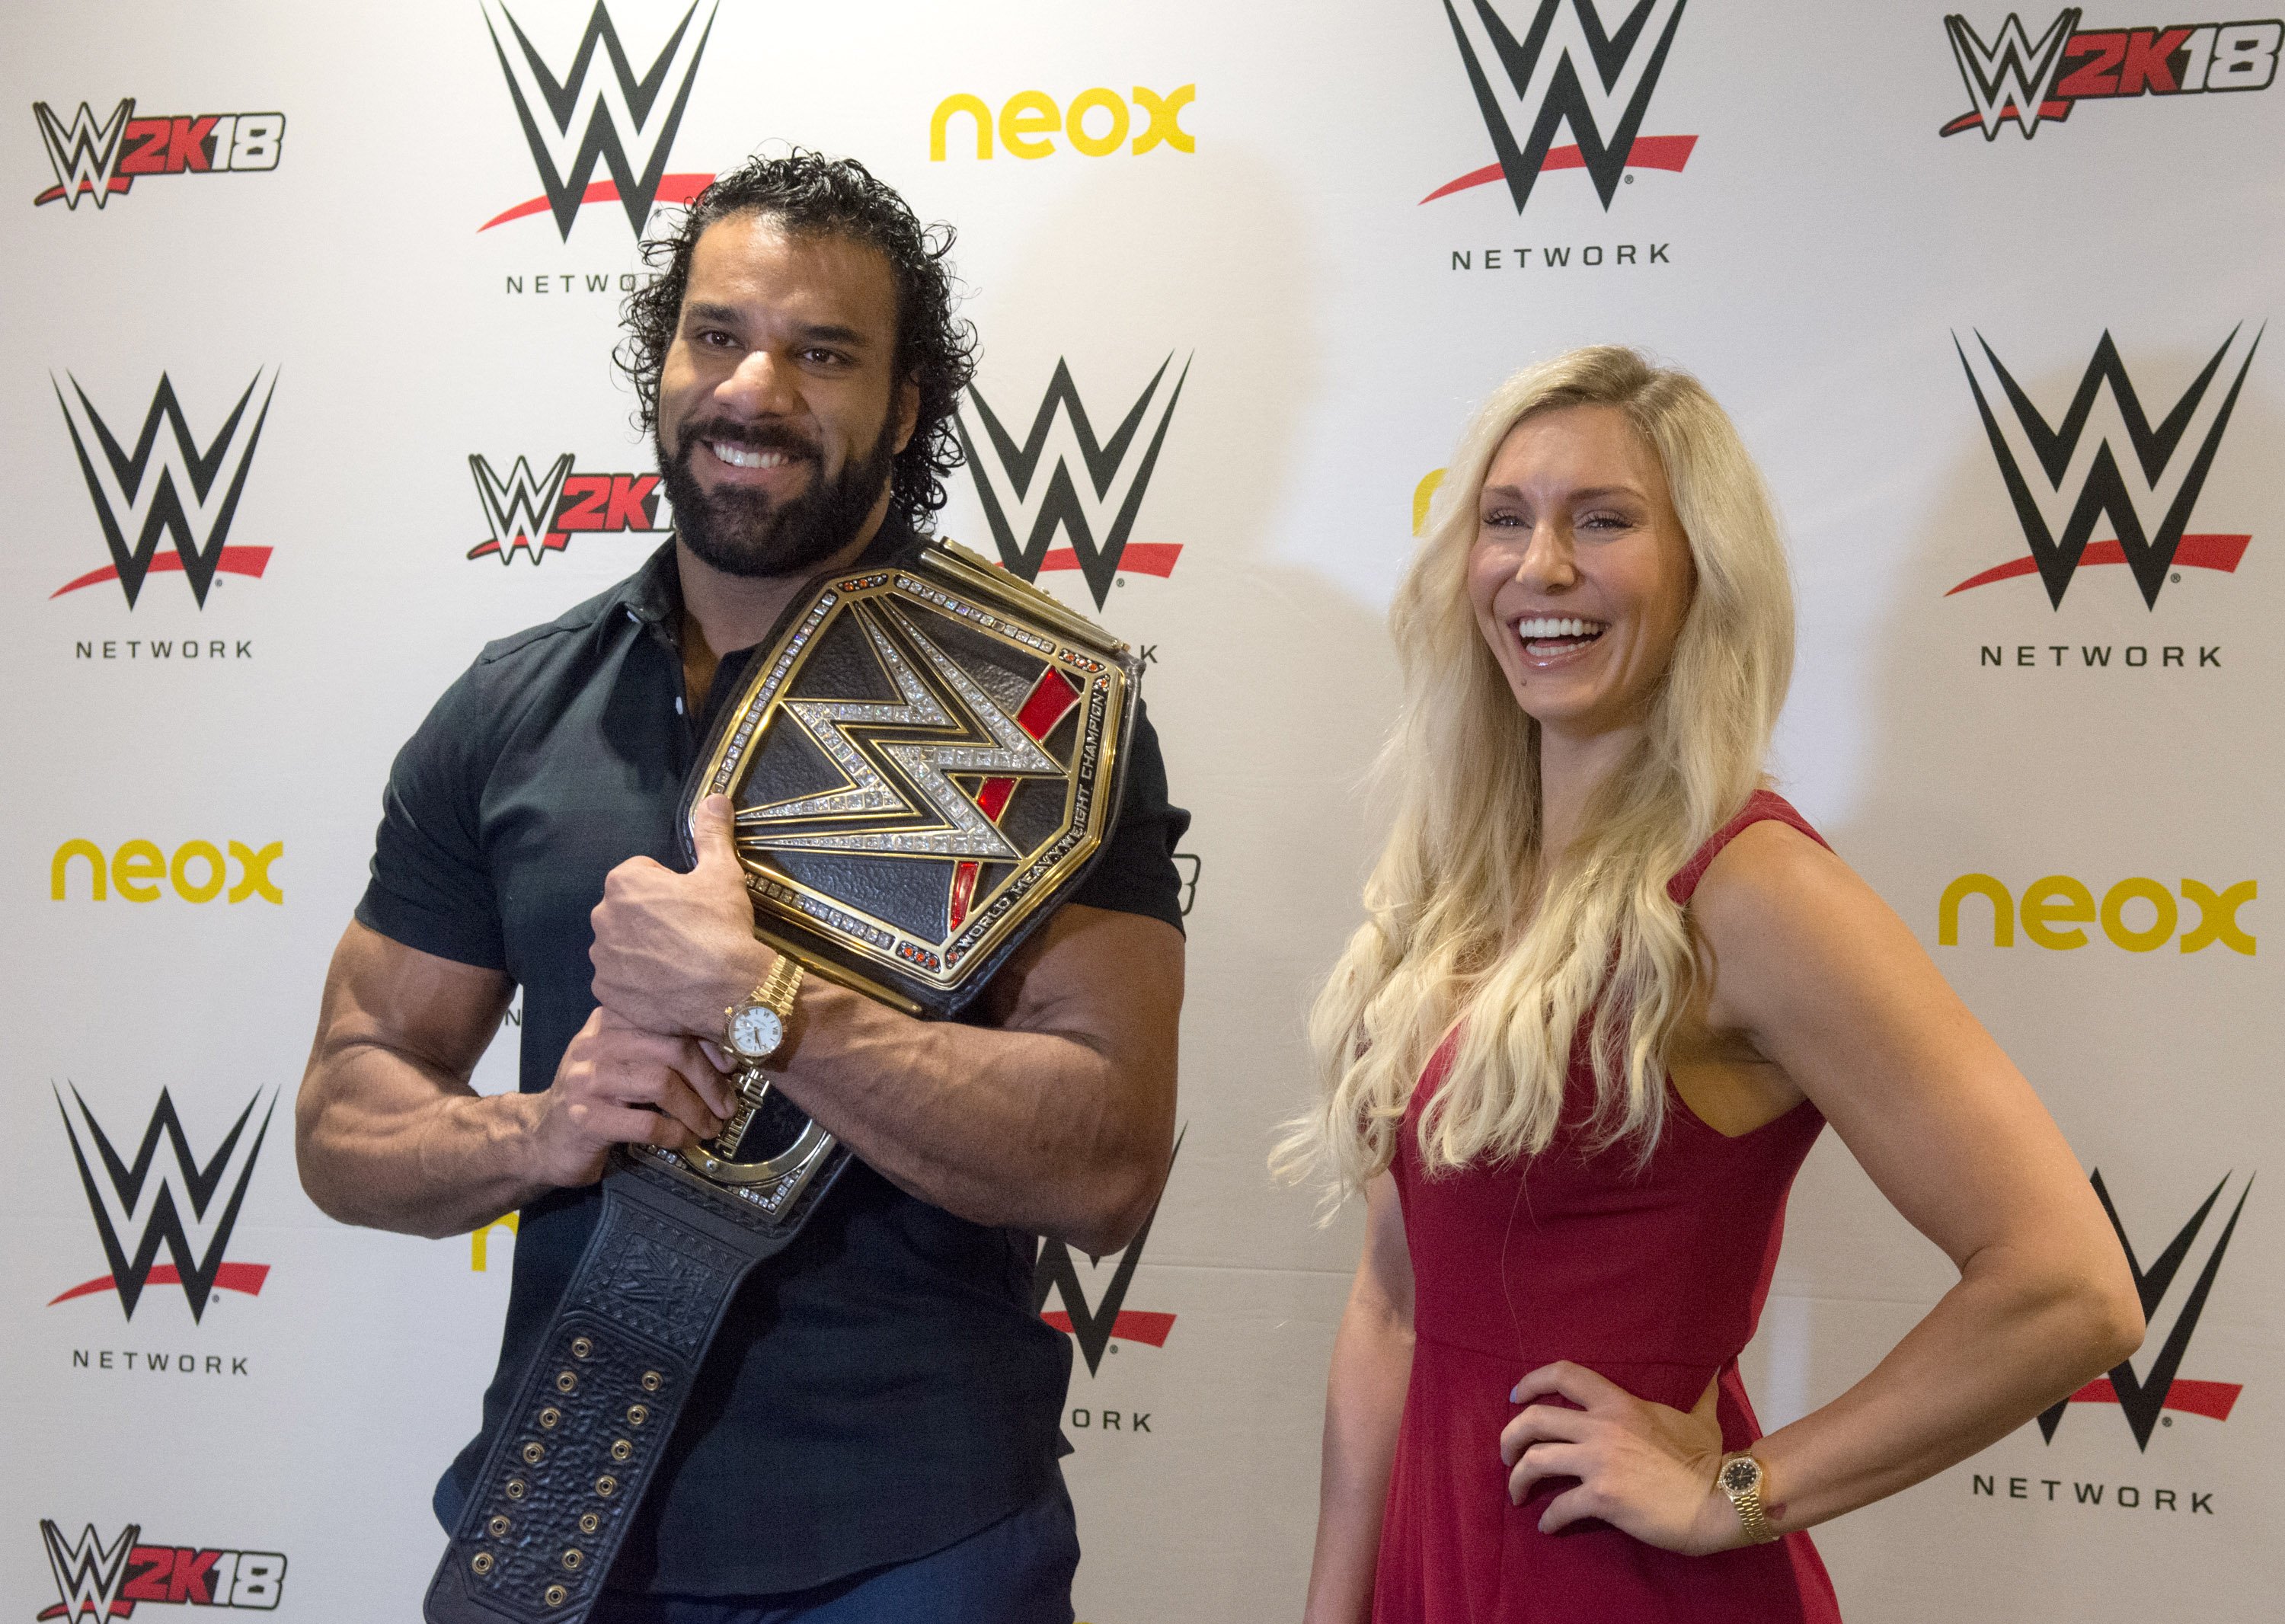 Jinder Mahal Reveals Injury He’s Been Working Through, Daniel Bryan Comments On WWE & His Concussions